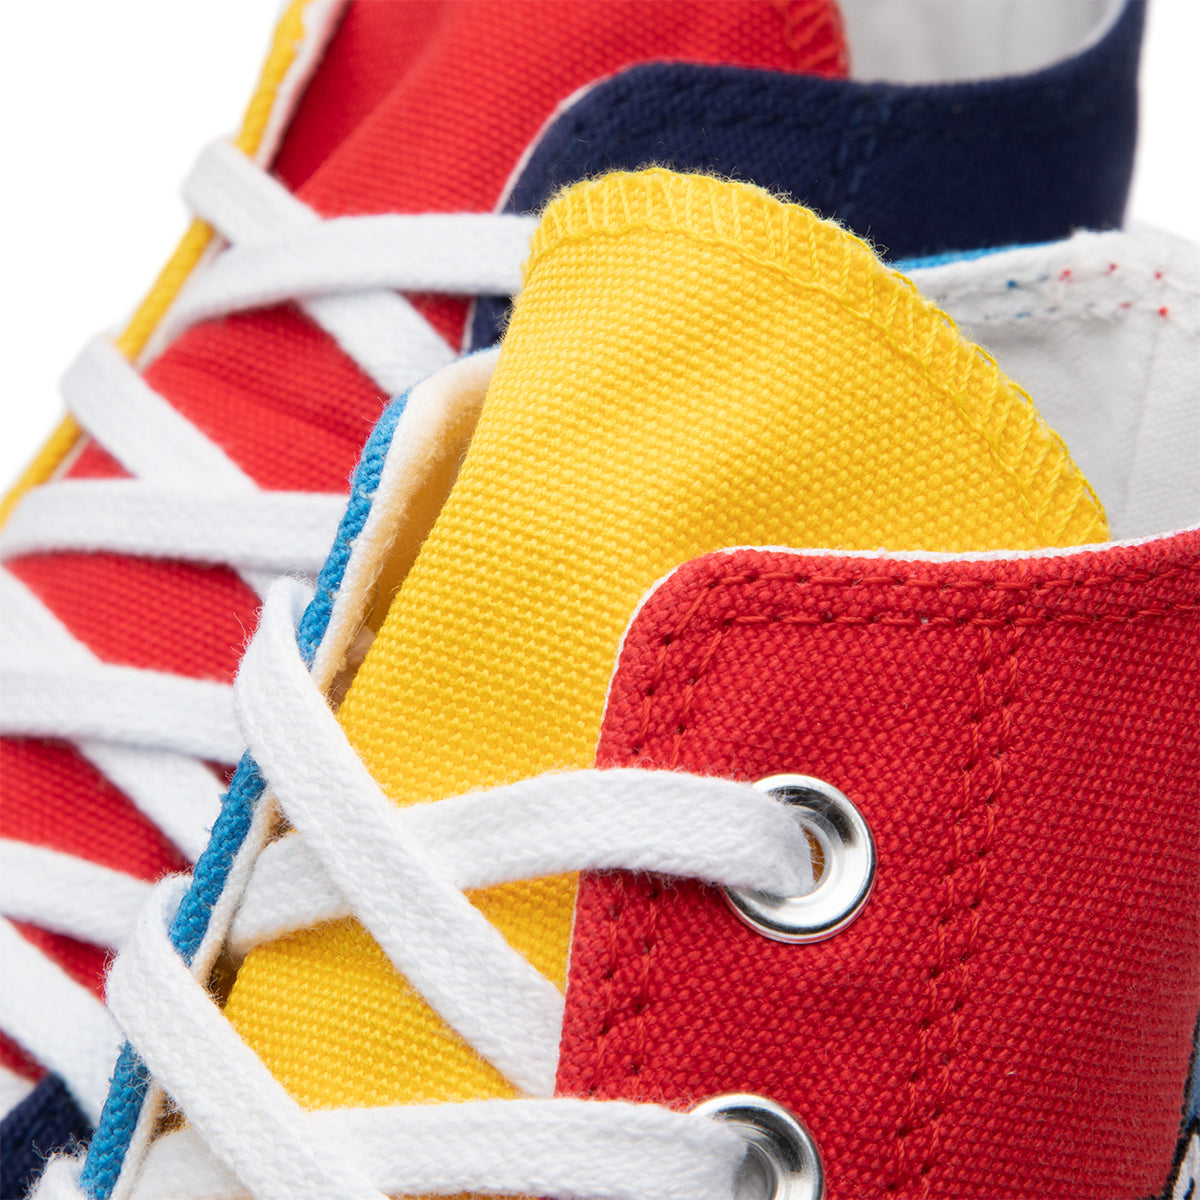 blue yellow red converse